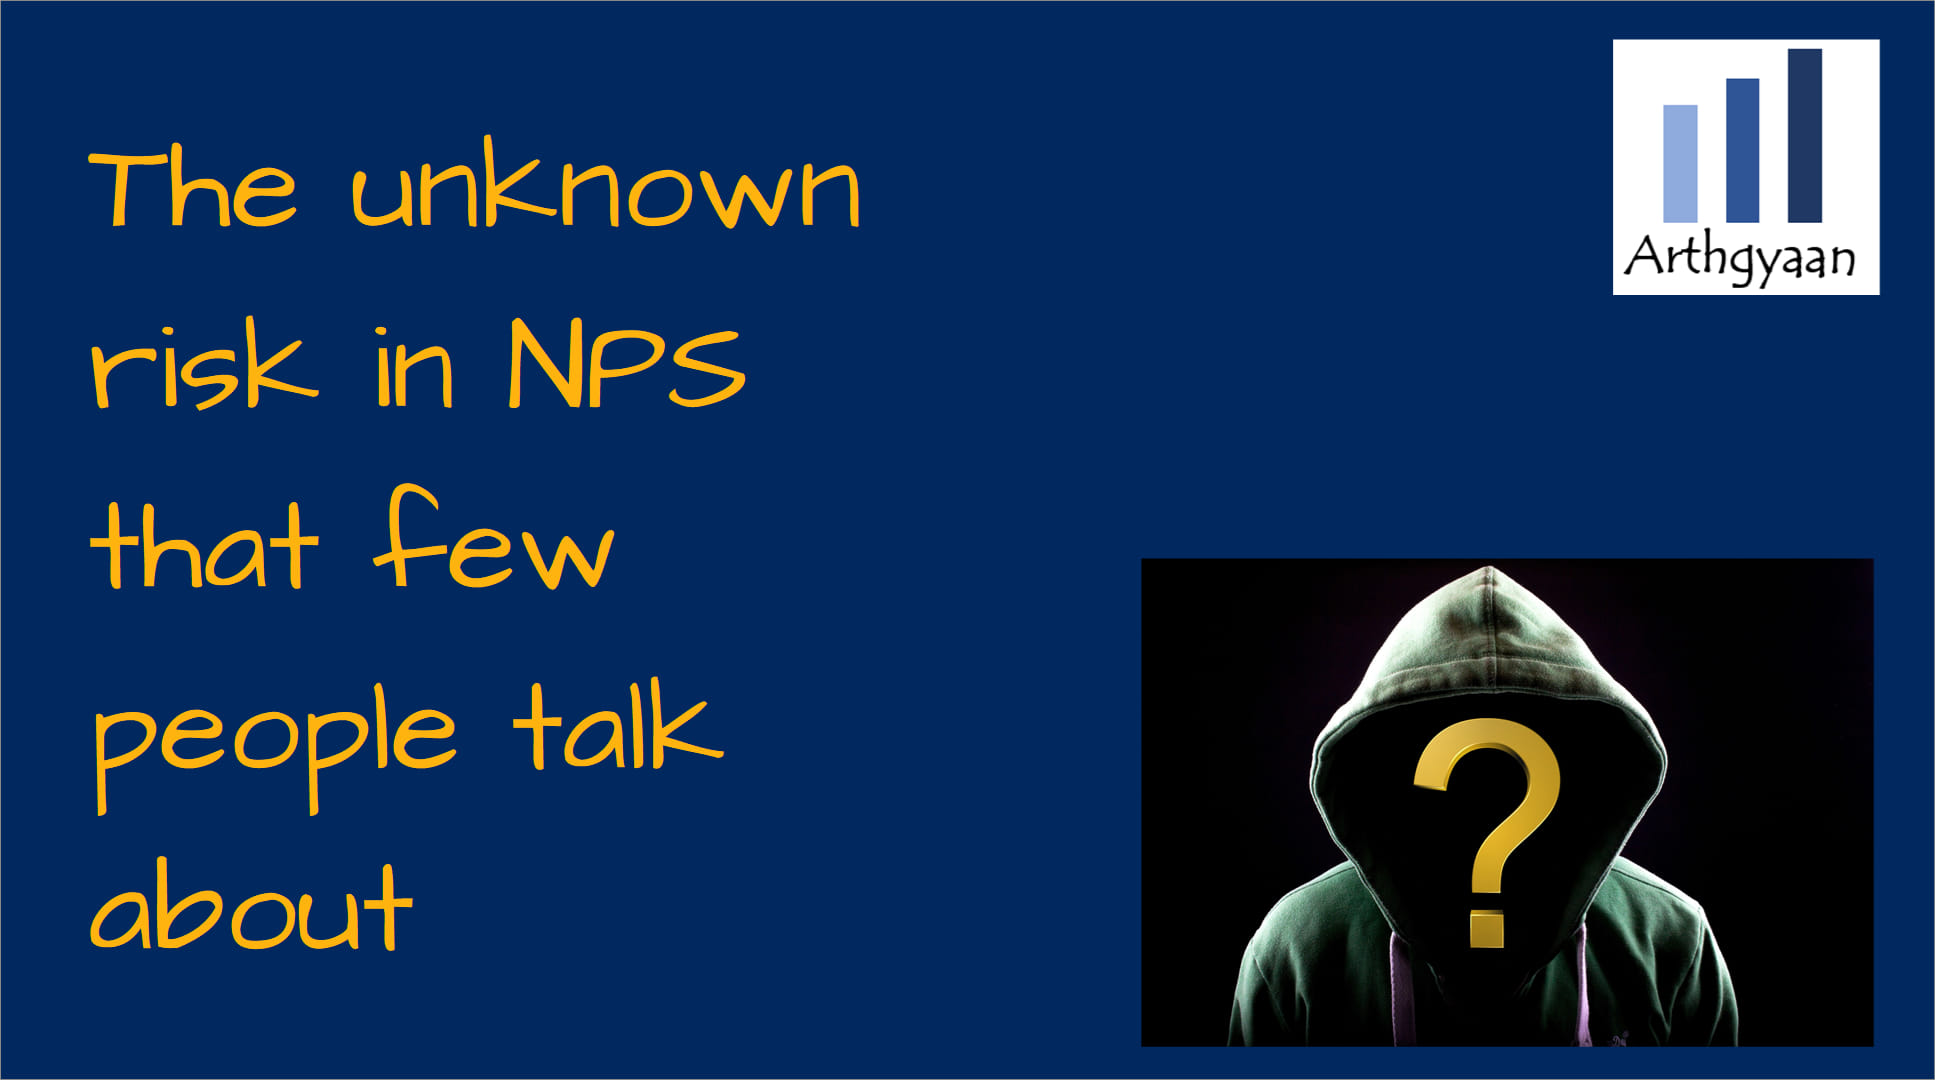 The unknown risk in NPS that few people talk about